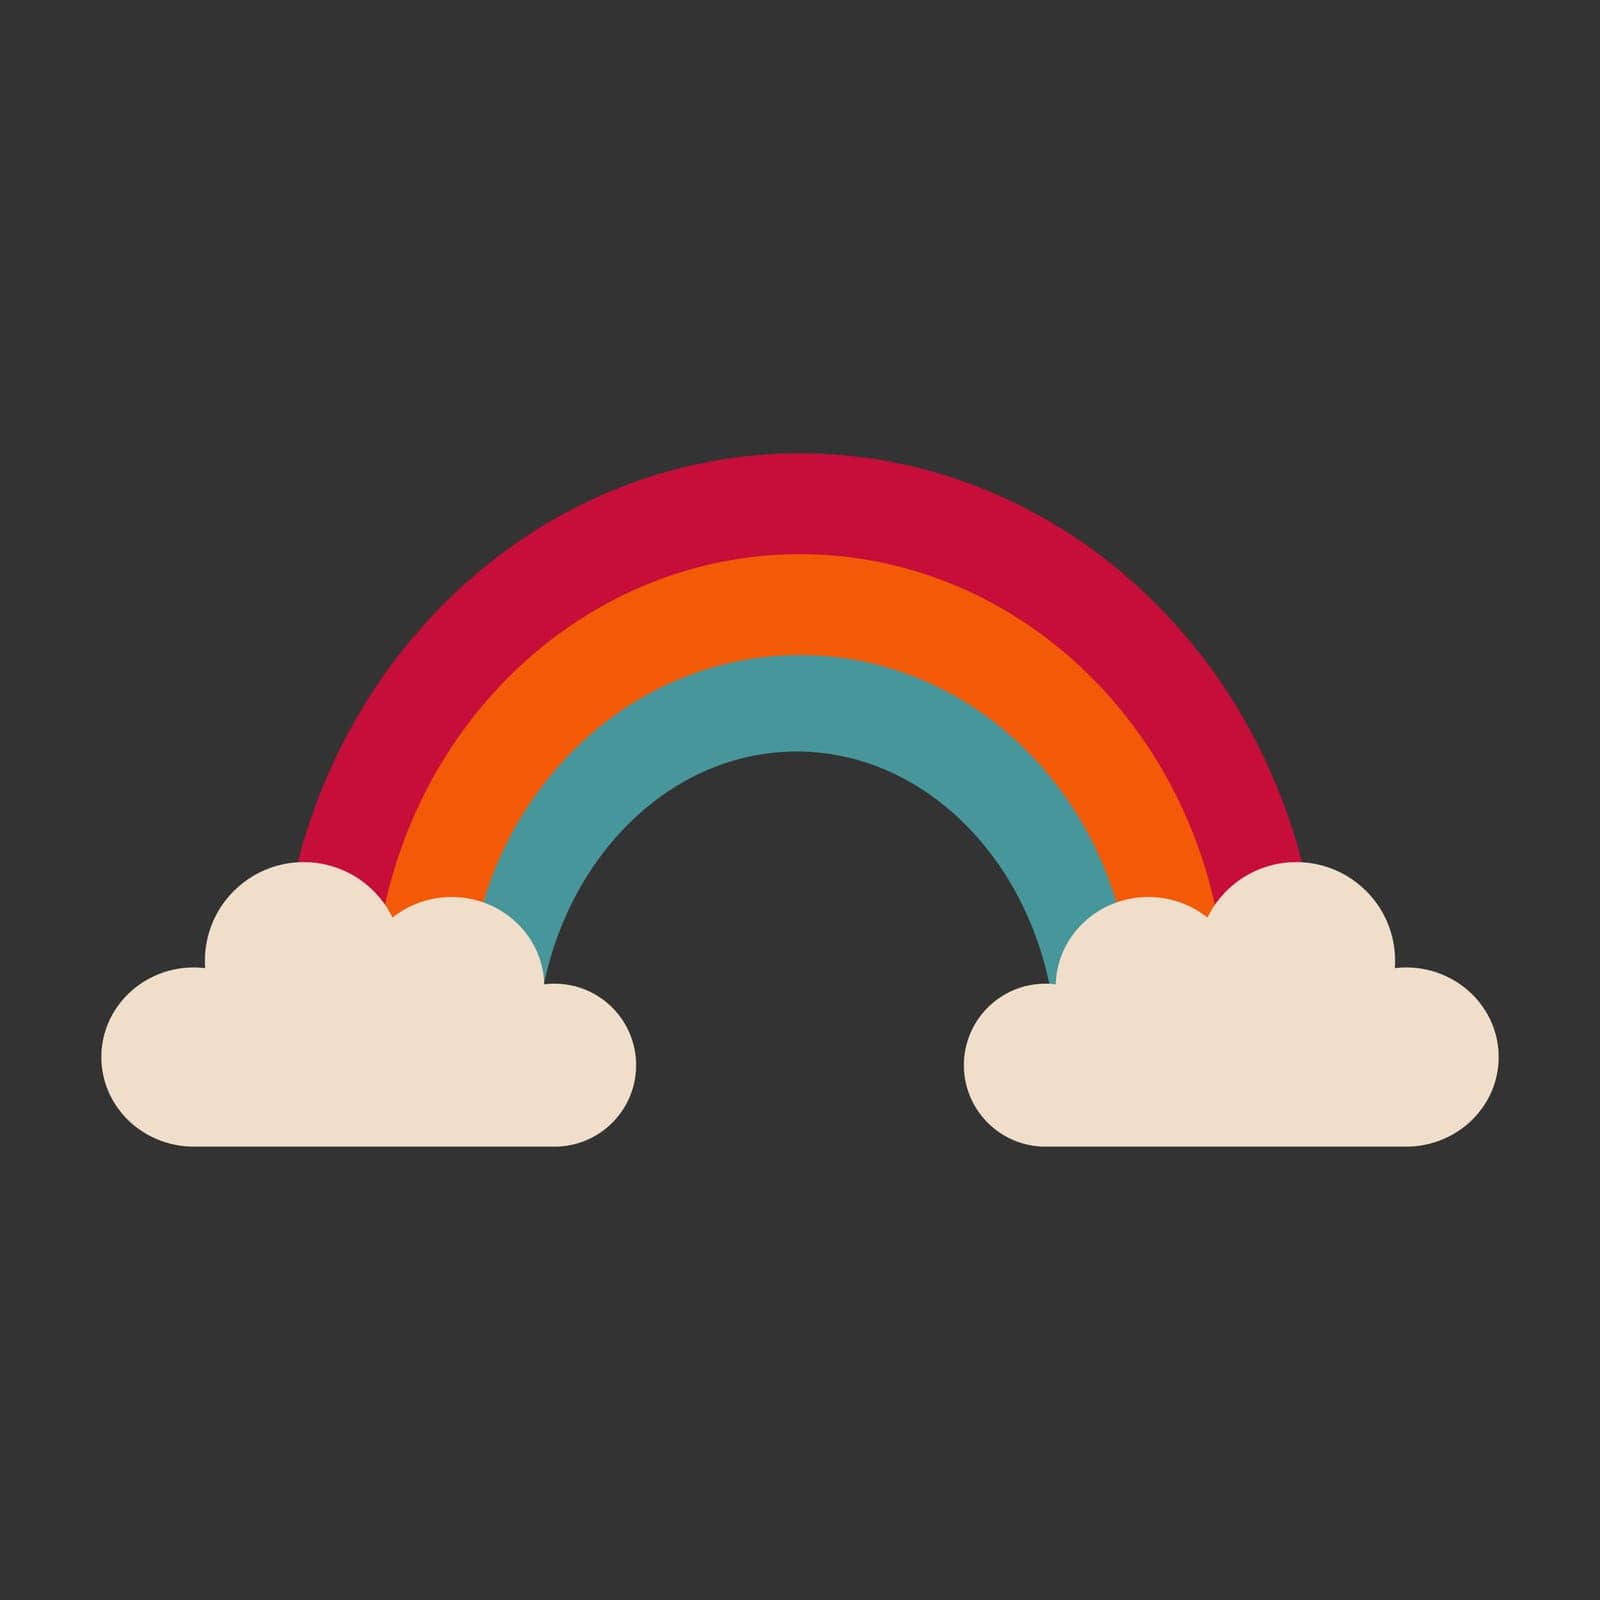 Illustration of a rainbow and two clouds. Dark tones. Vector image by MeinLieben